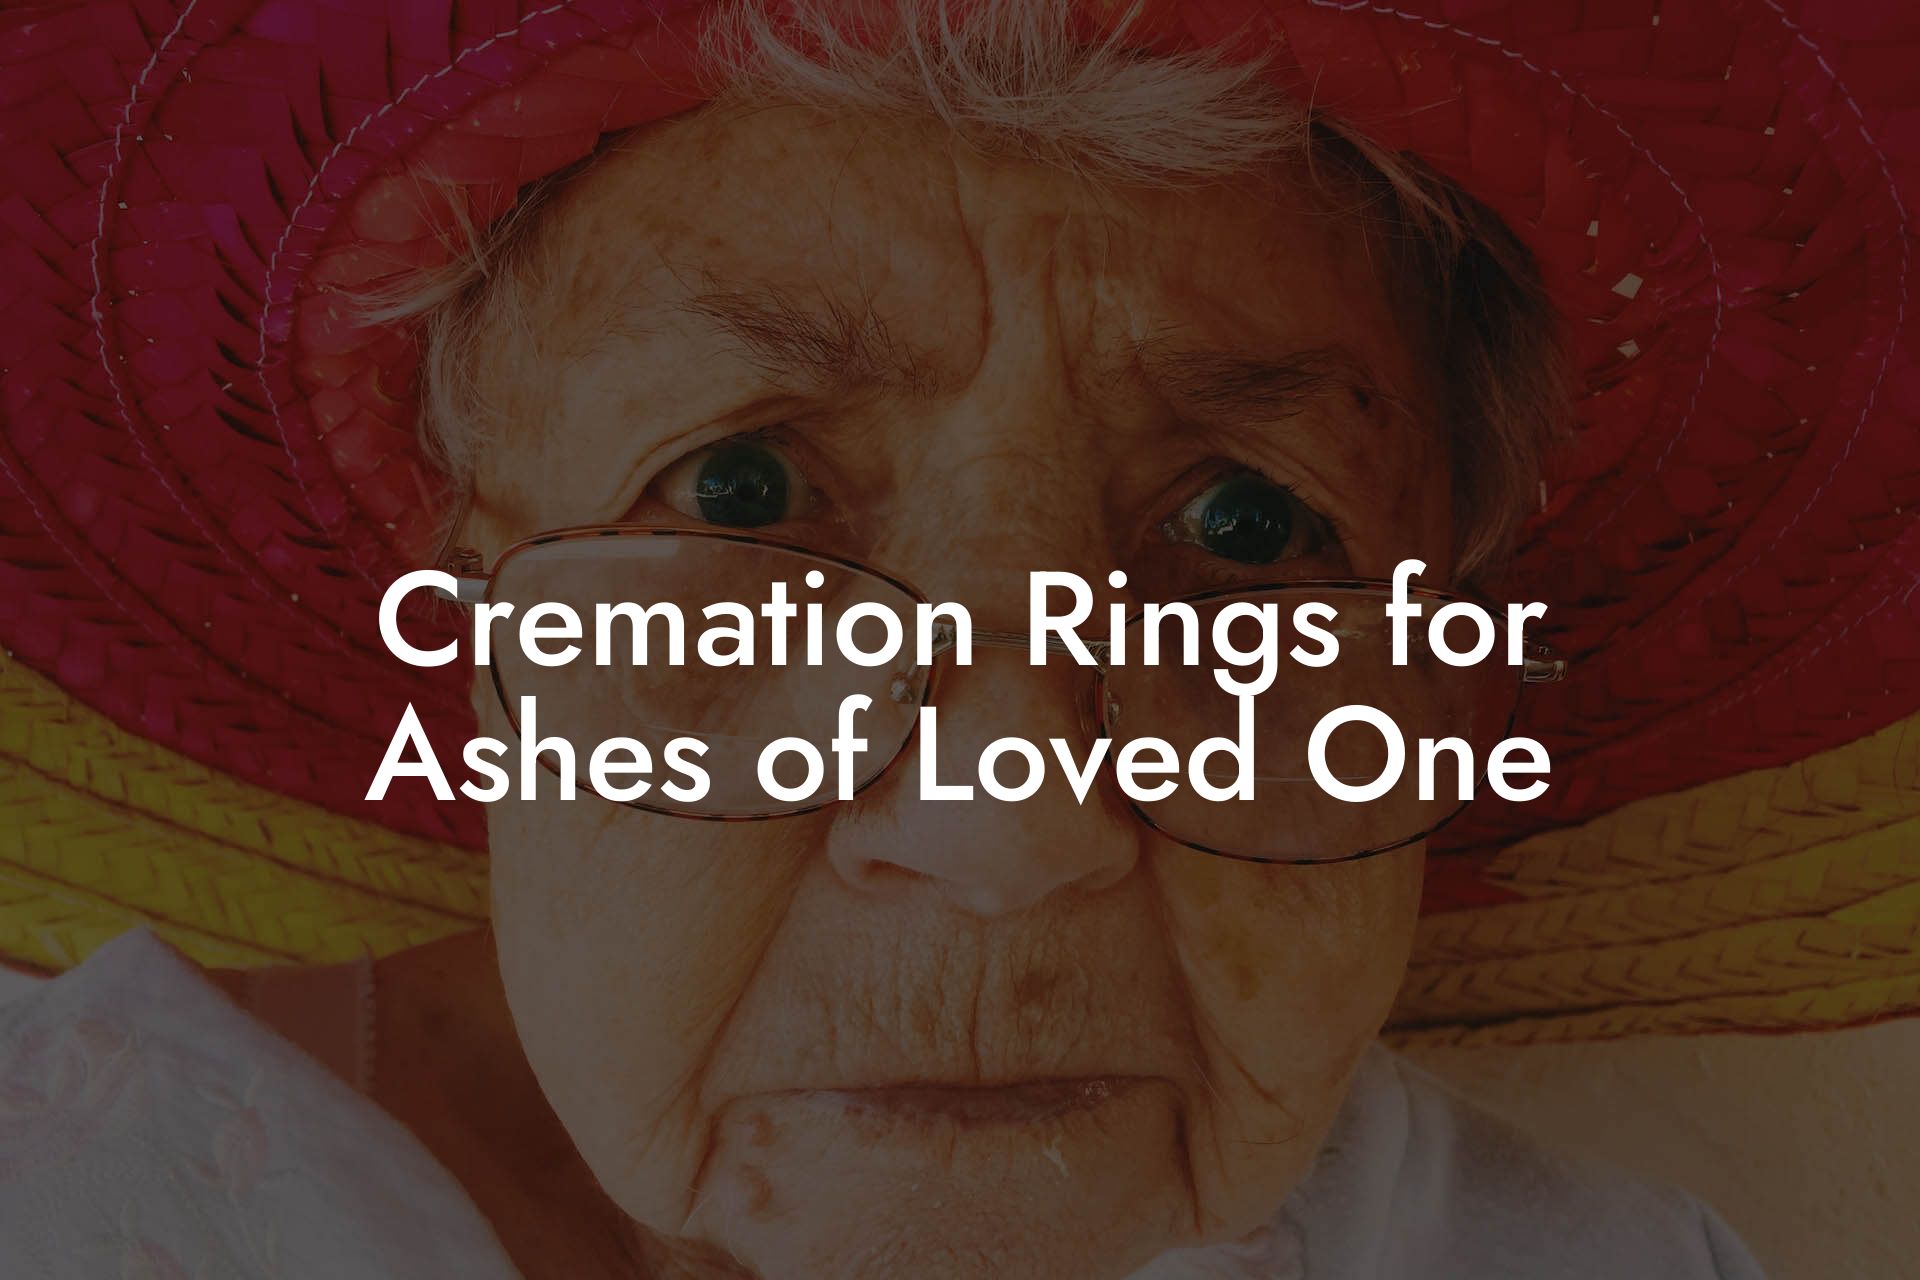 Cremation Rings for Ashes of Loved One